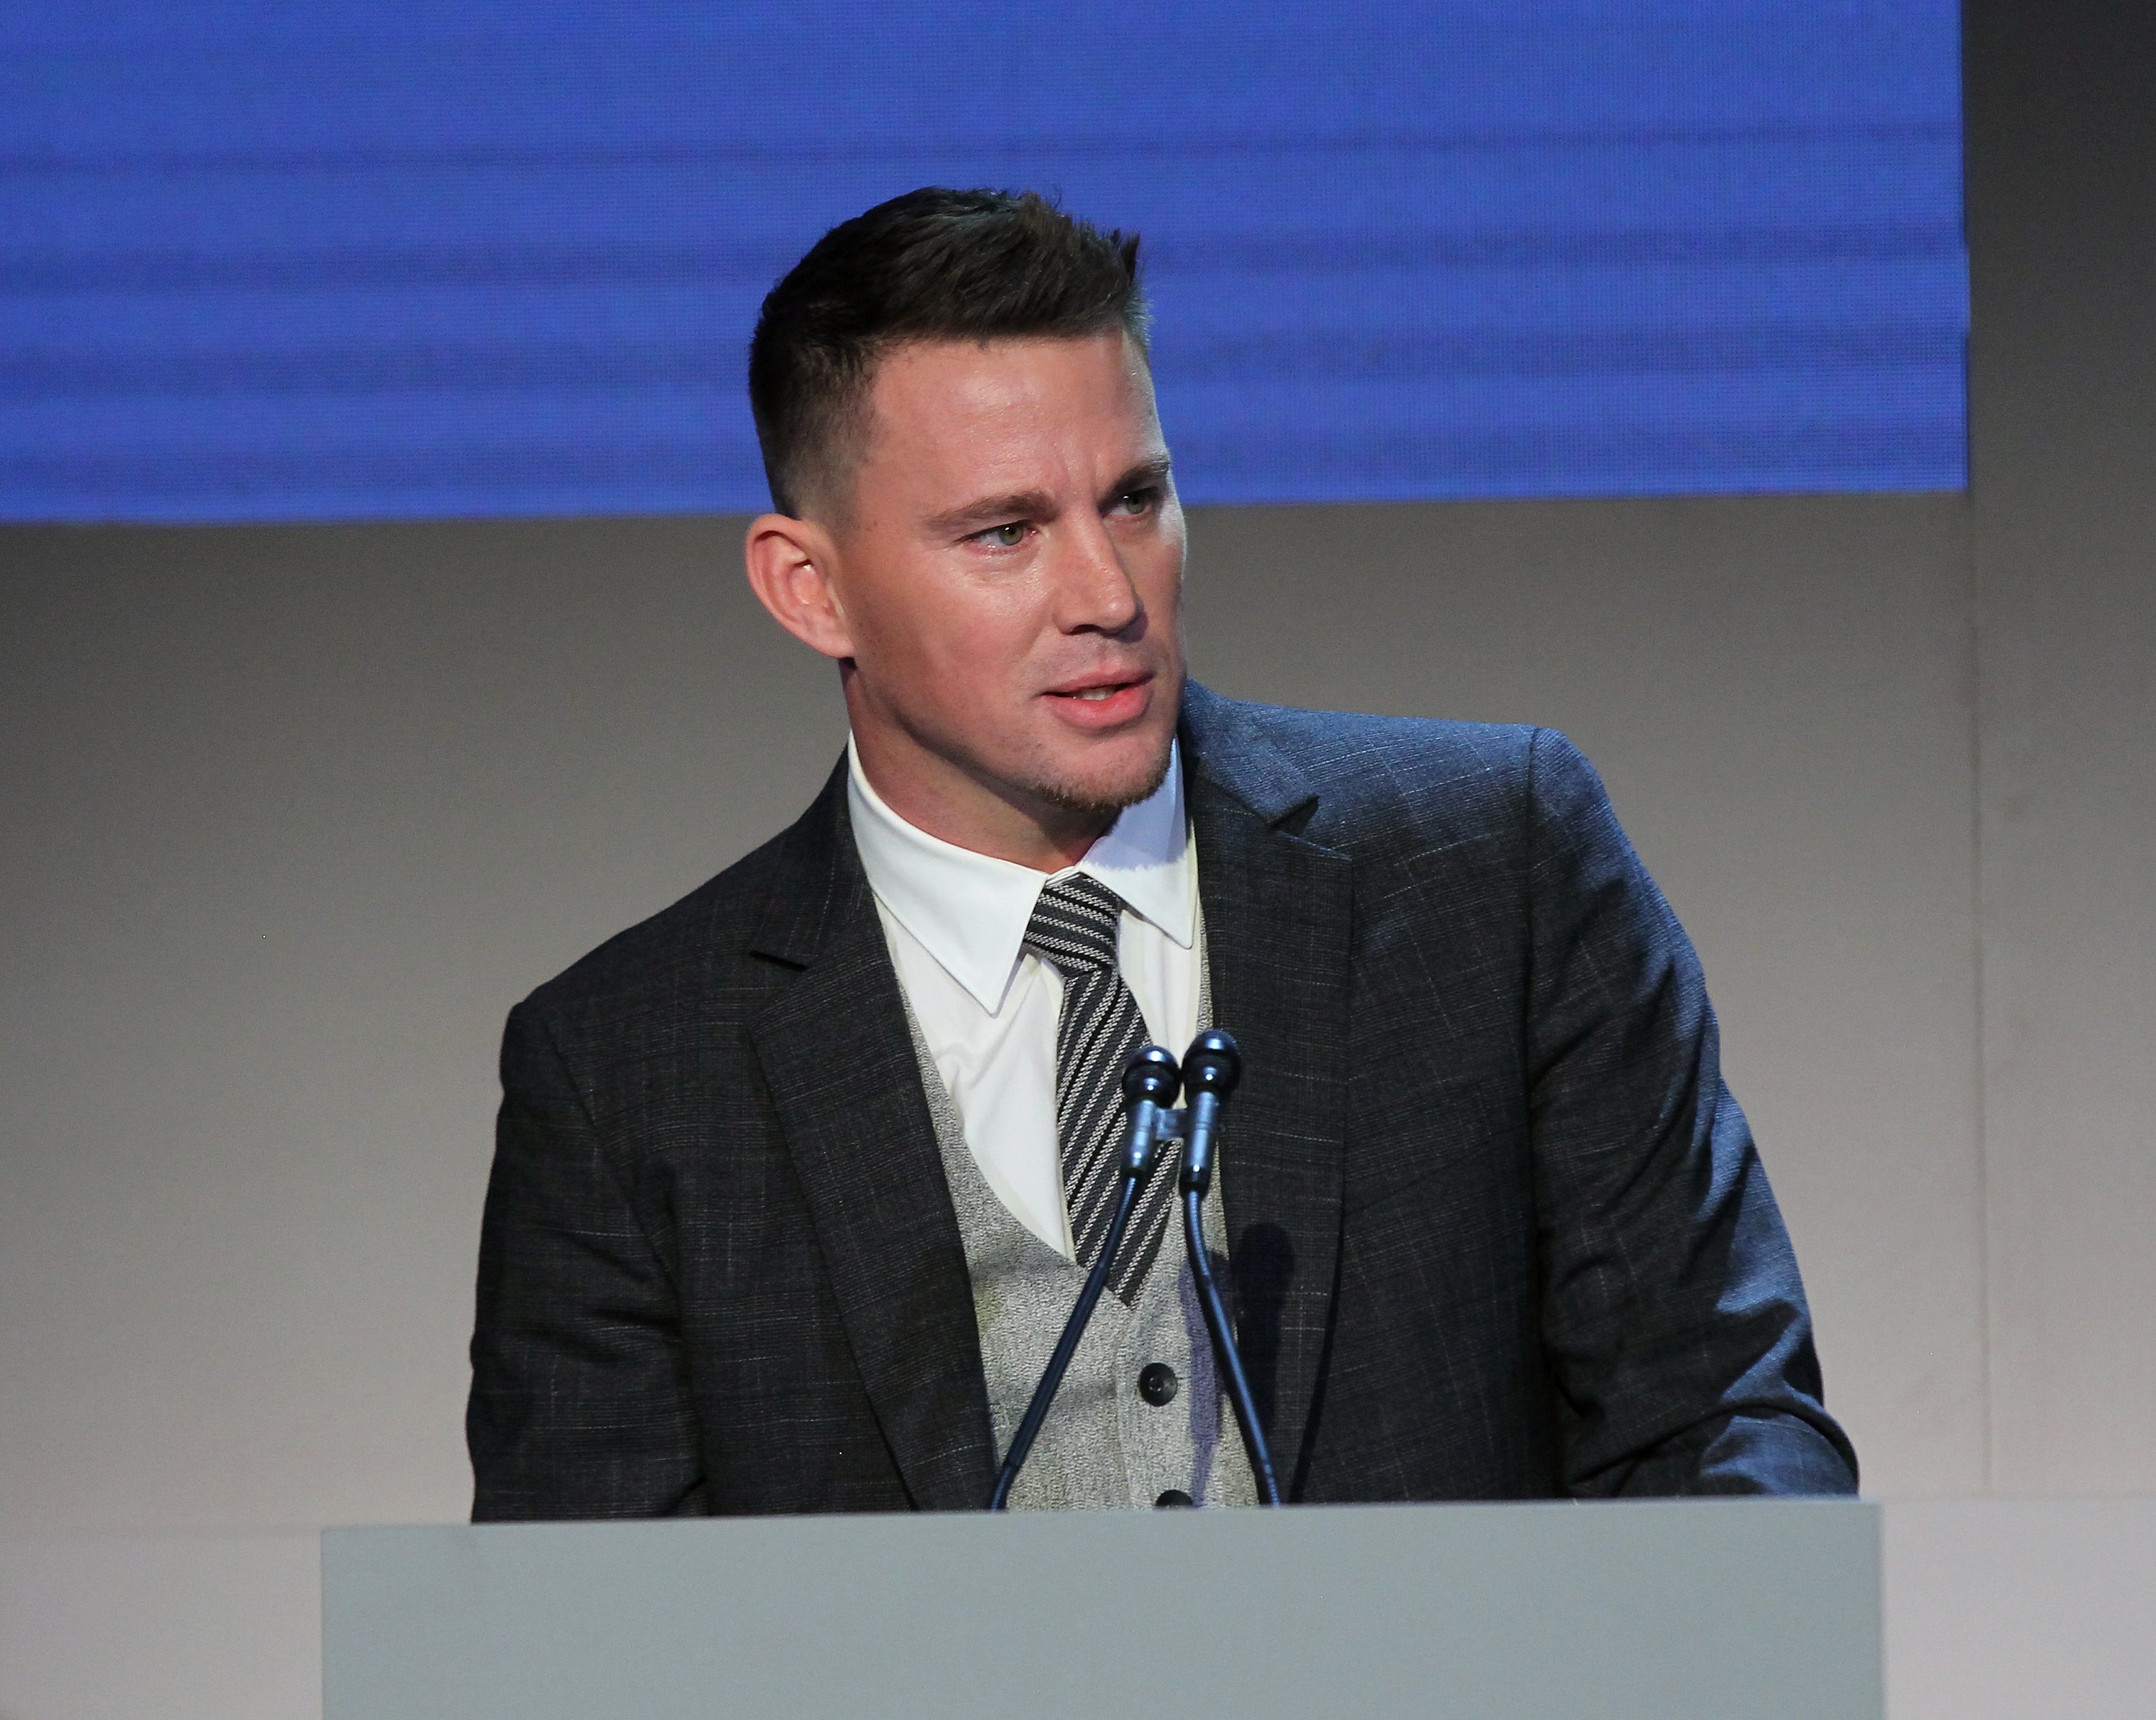 Channing Tatum speaks at the Innovator Awards in New York City on November 7, 2018 | Photo: Getty Images